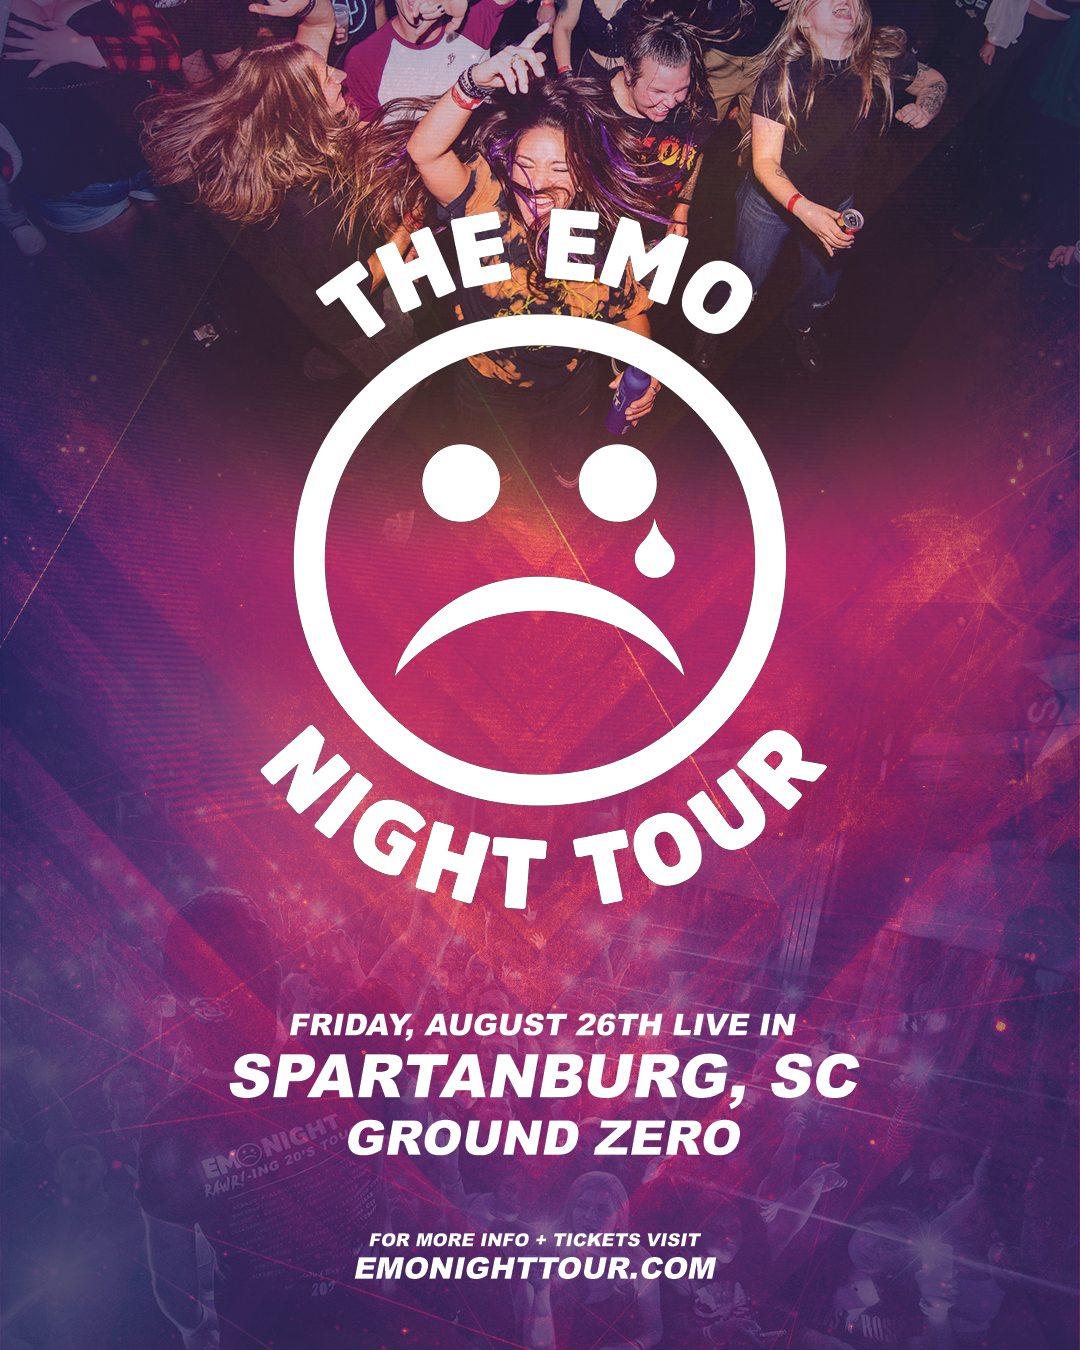 Buy Tickets to The Emo Night Tour at Ground Zero in Spartanburg on Aug